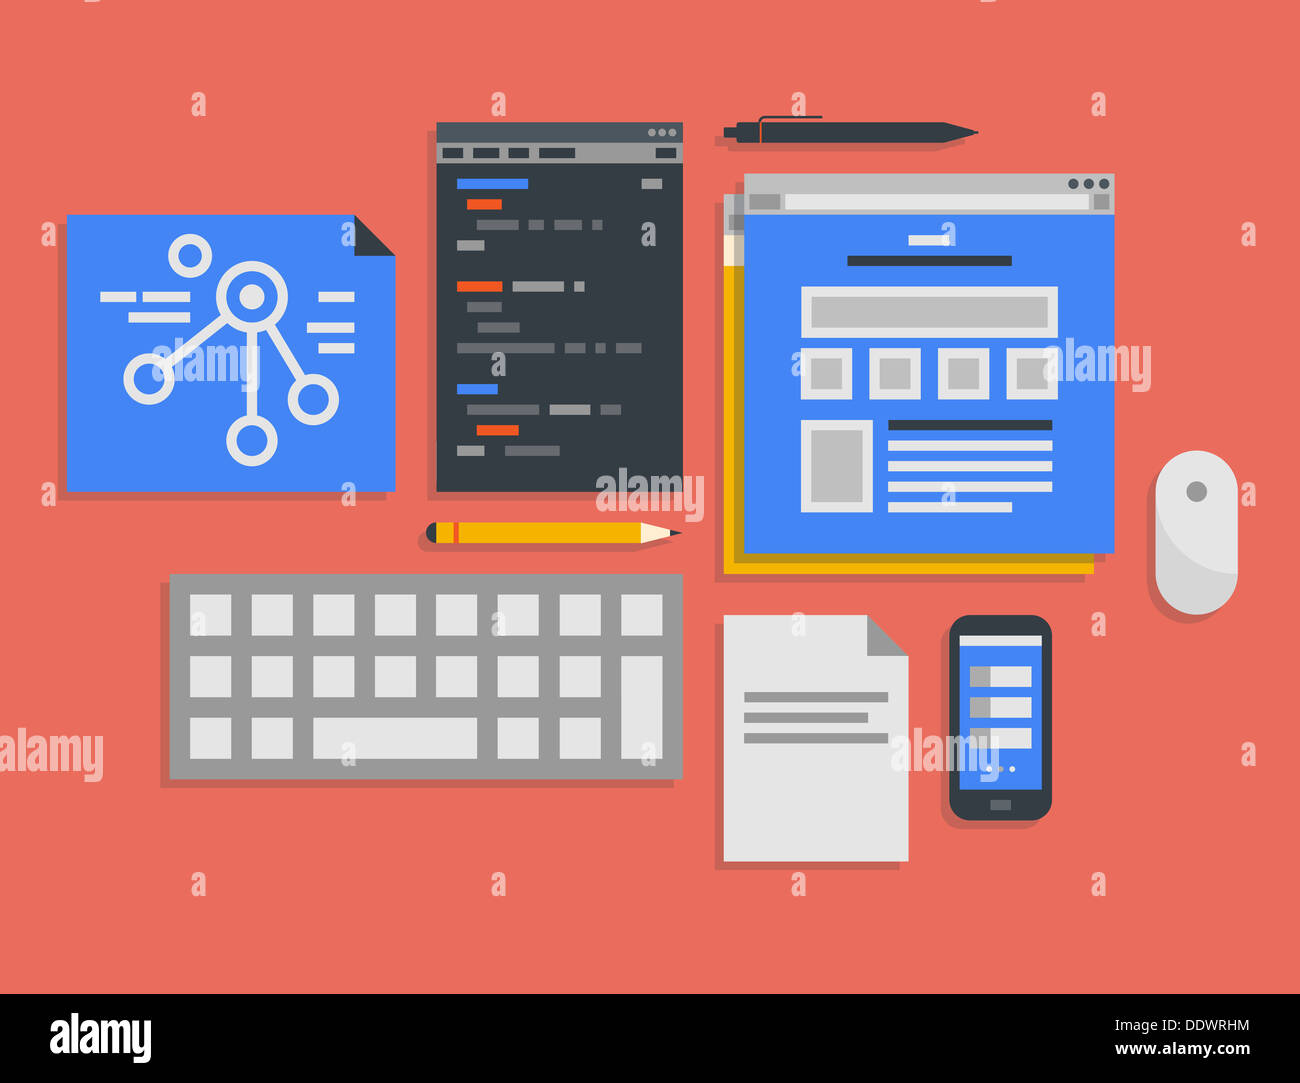 Flat design vector illustration icons set of modern office workflow for web programming and mobile development process Stock Photo